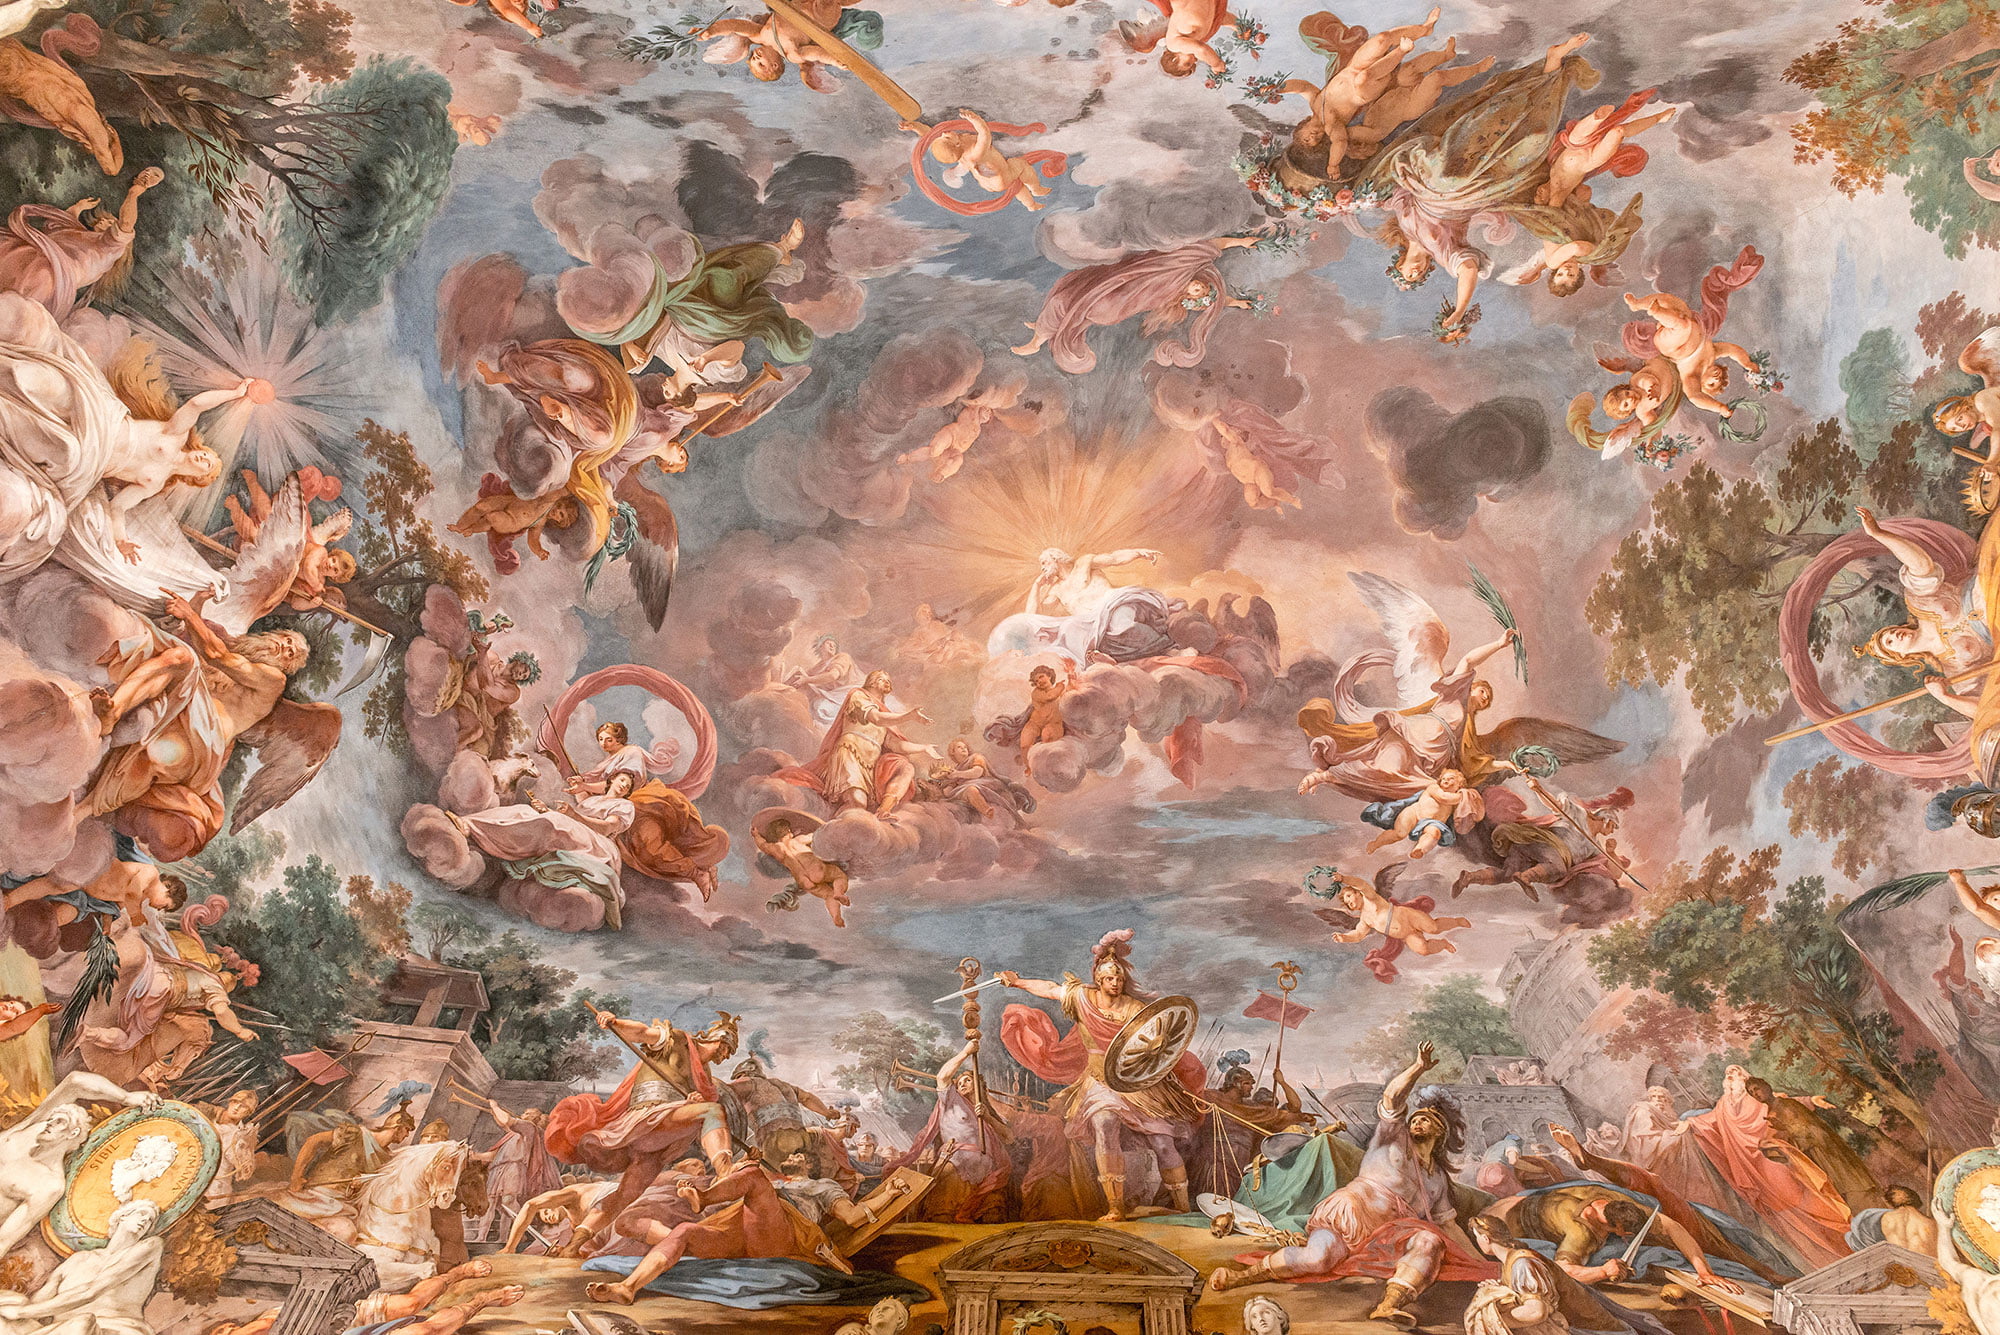 The glory of the baroque: Illusionistic ceiling paintings - Romamirabilia